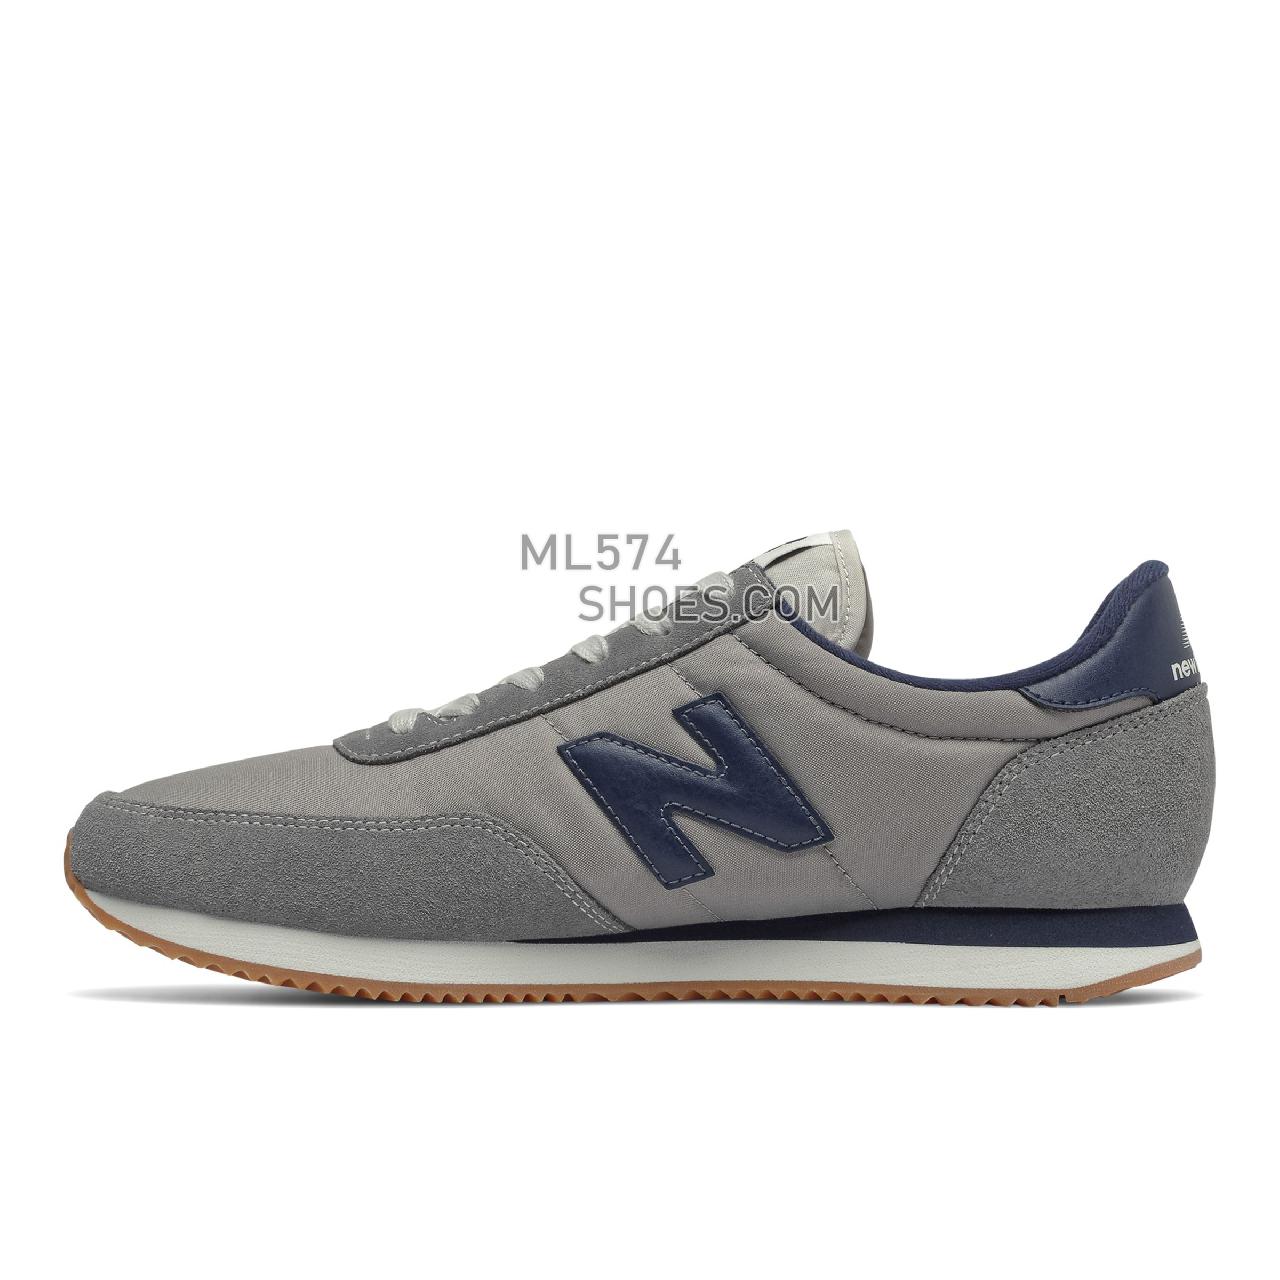 New Balance UL720V1 - Unisex Men's Women's Classic Sneakers - Marblehead with Eclipse - UL720VD1